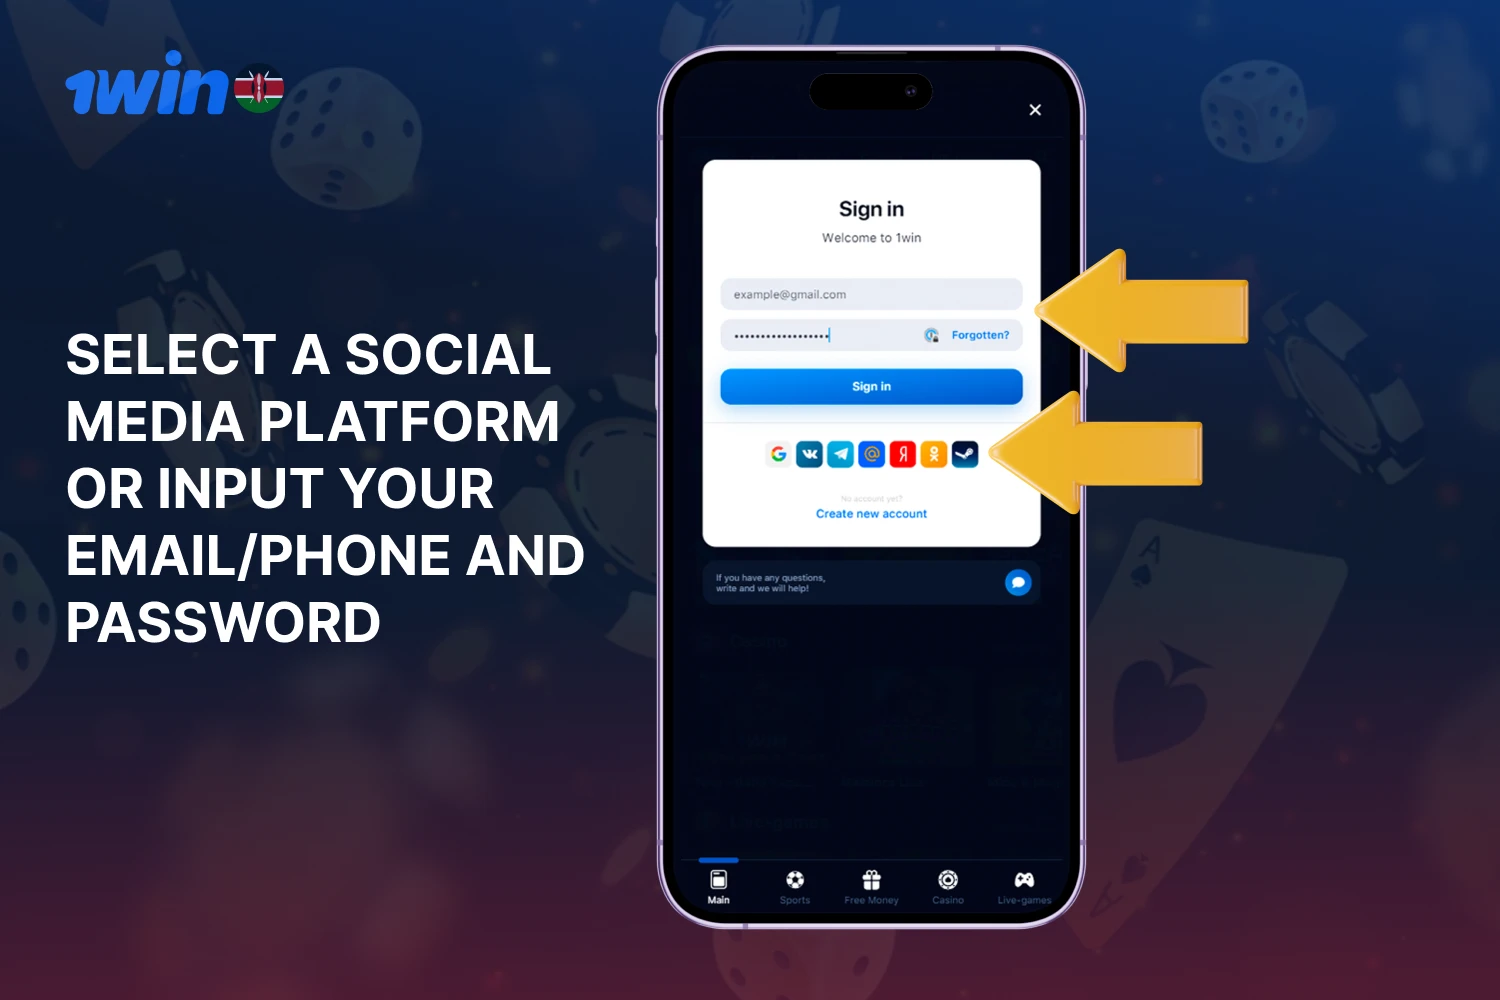 Enter your credentials or use a social media platform to log in to 1win Kenya